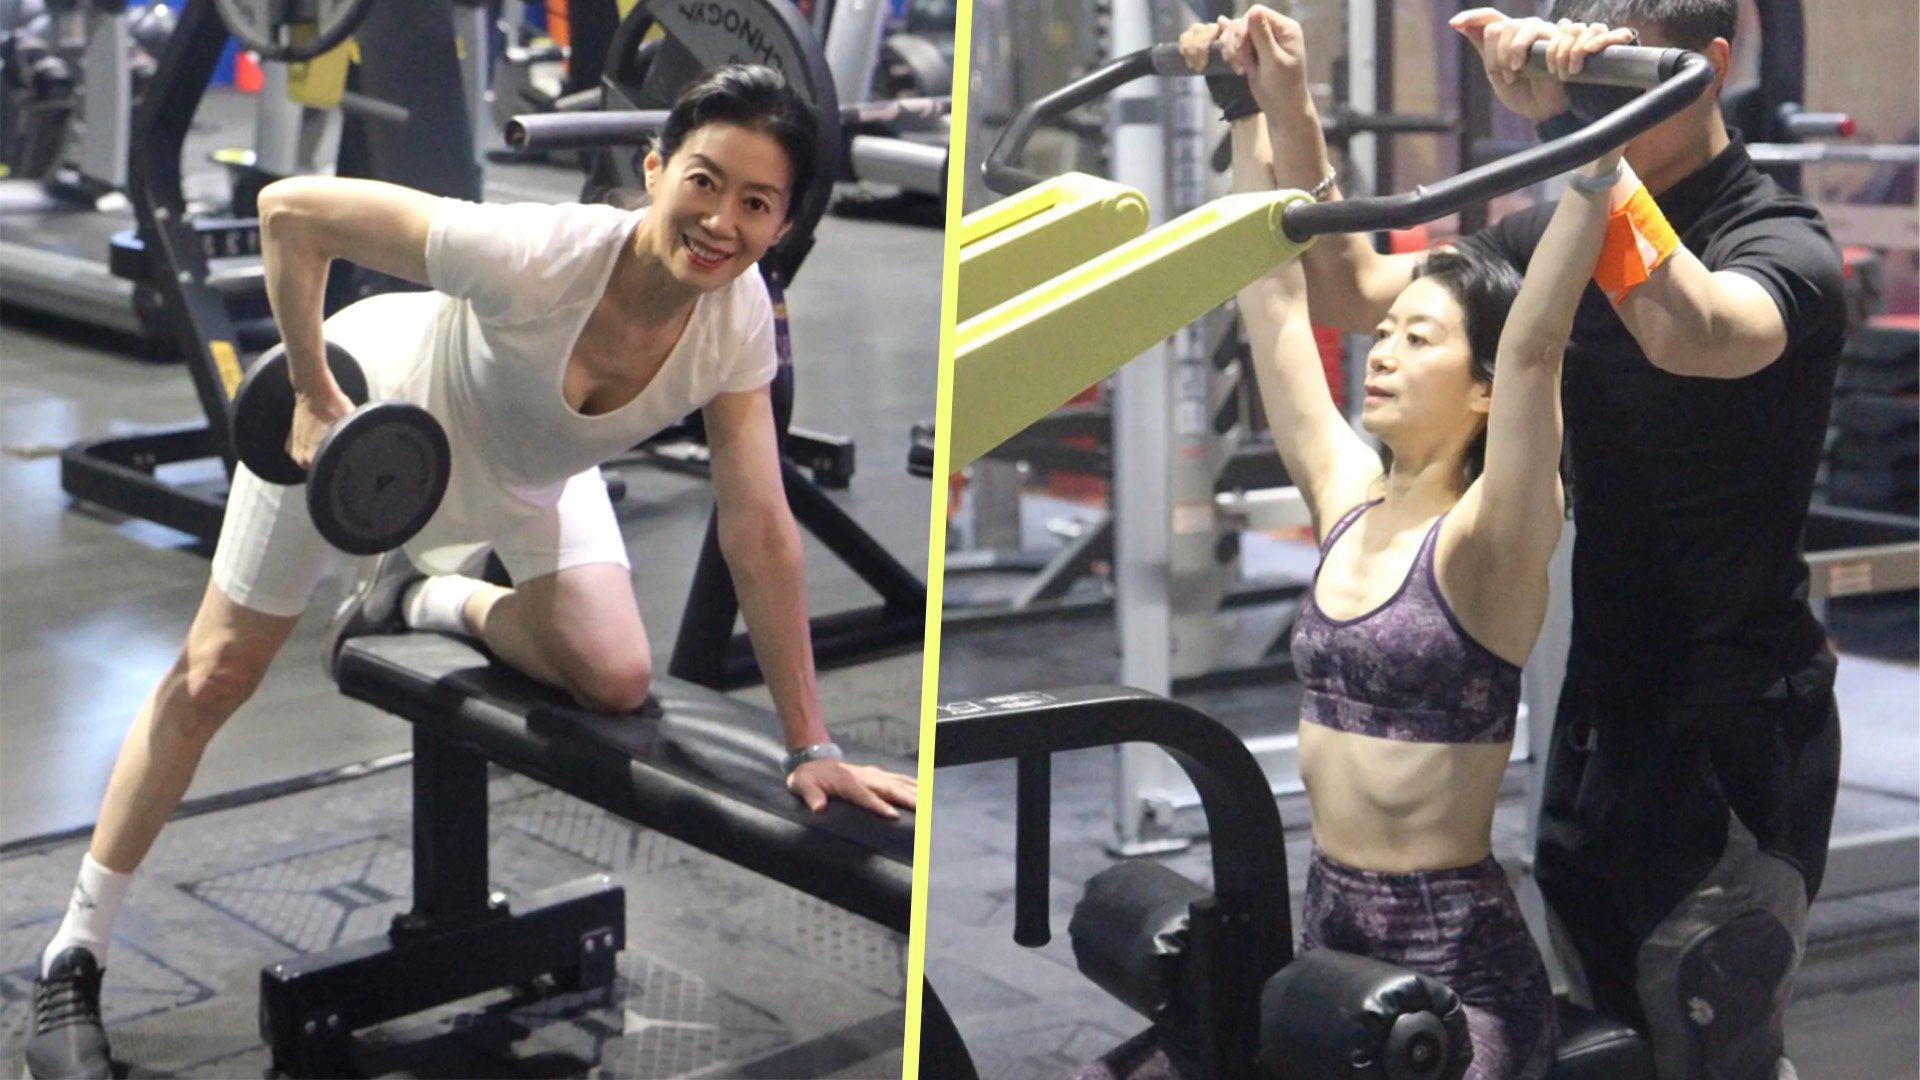 A 63-year-old retired woman in China has impressed many people online by keeping old age at bay with an impressive gym workout regime. Photo: SCMP composite/Douyin